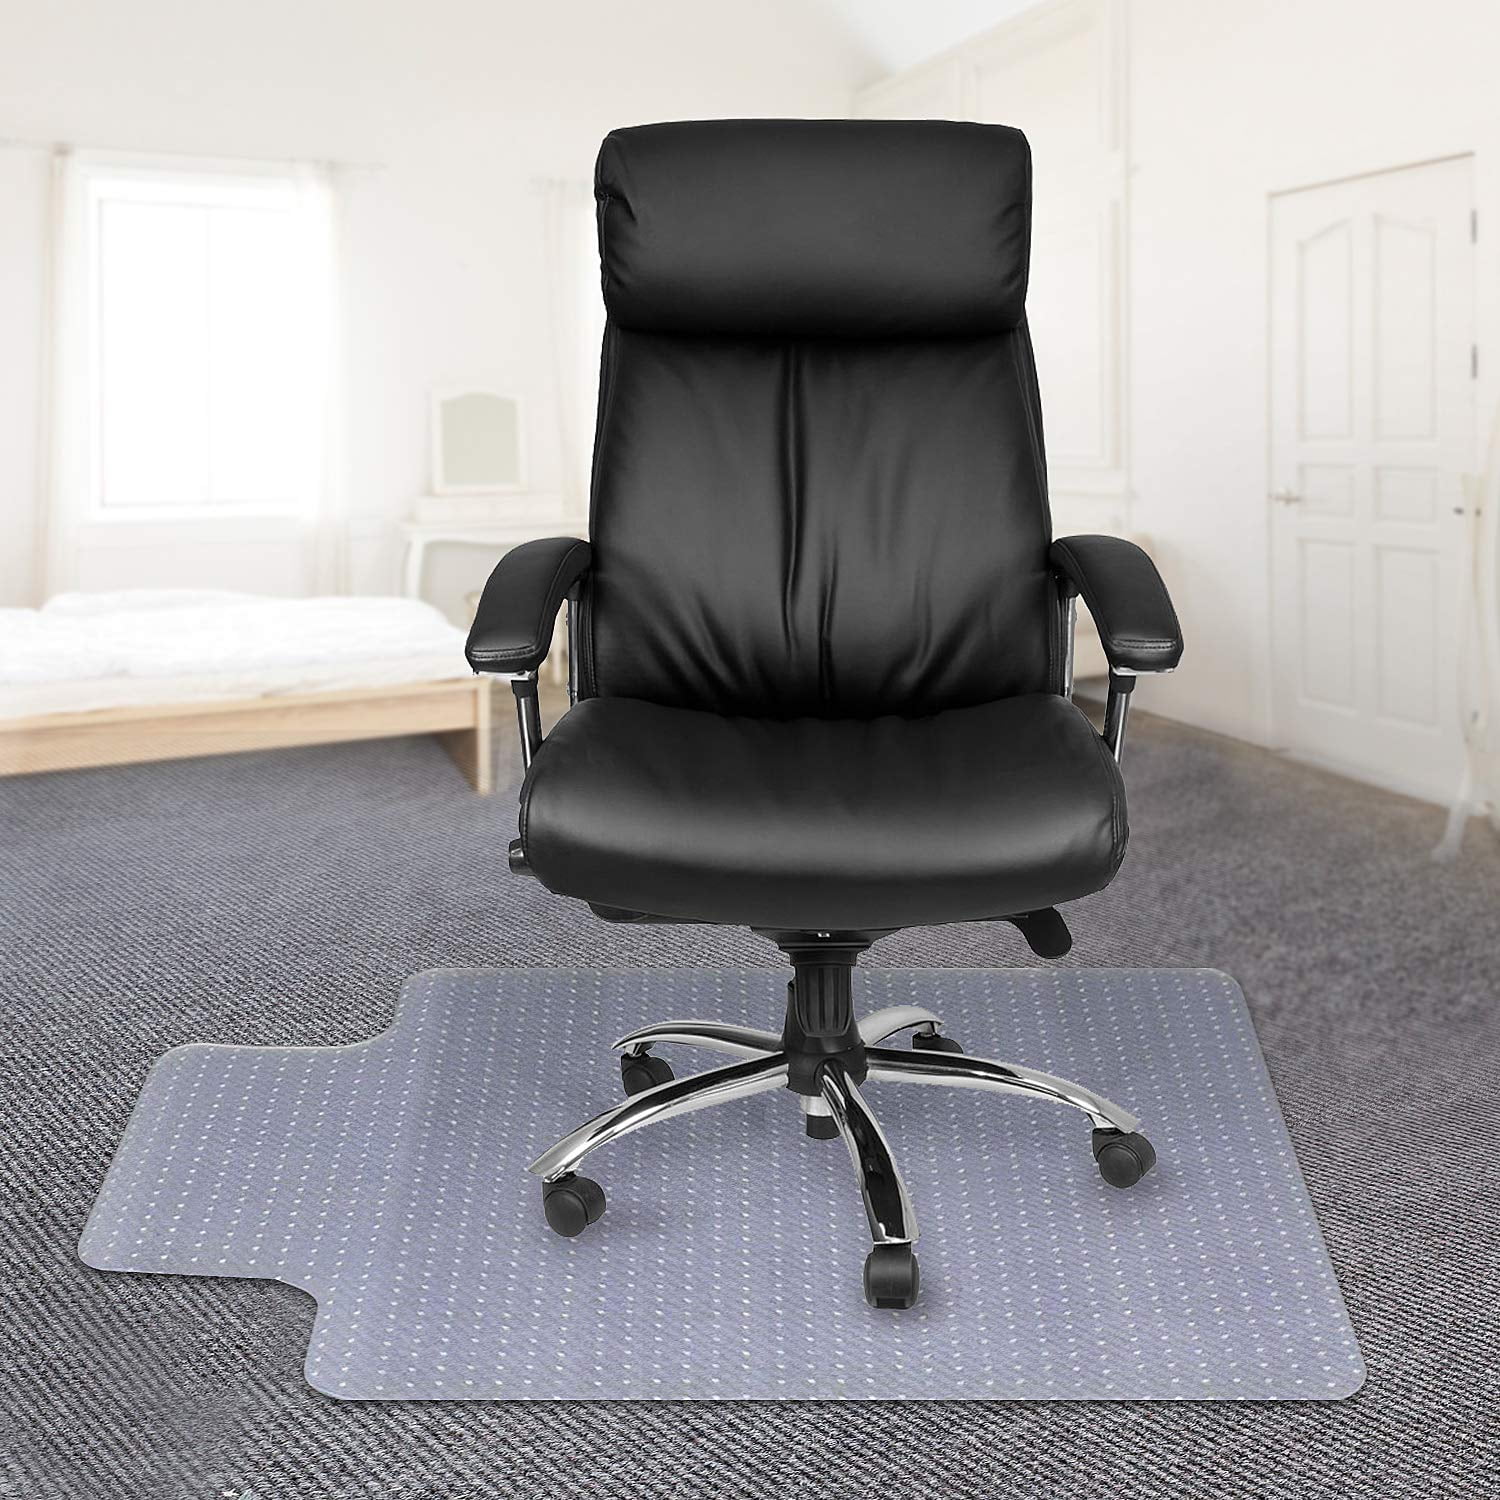 Lowestbest Plastic Office Chair Mat with Nail, Transparent